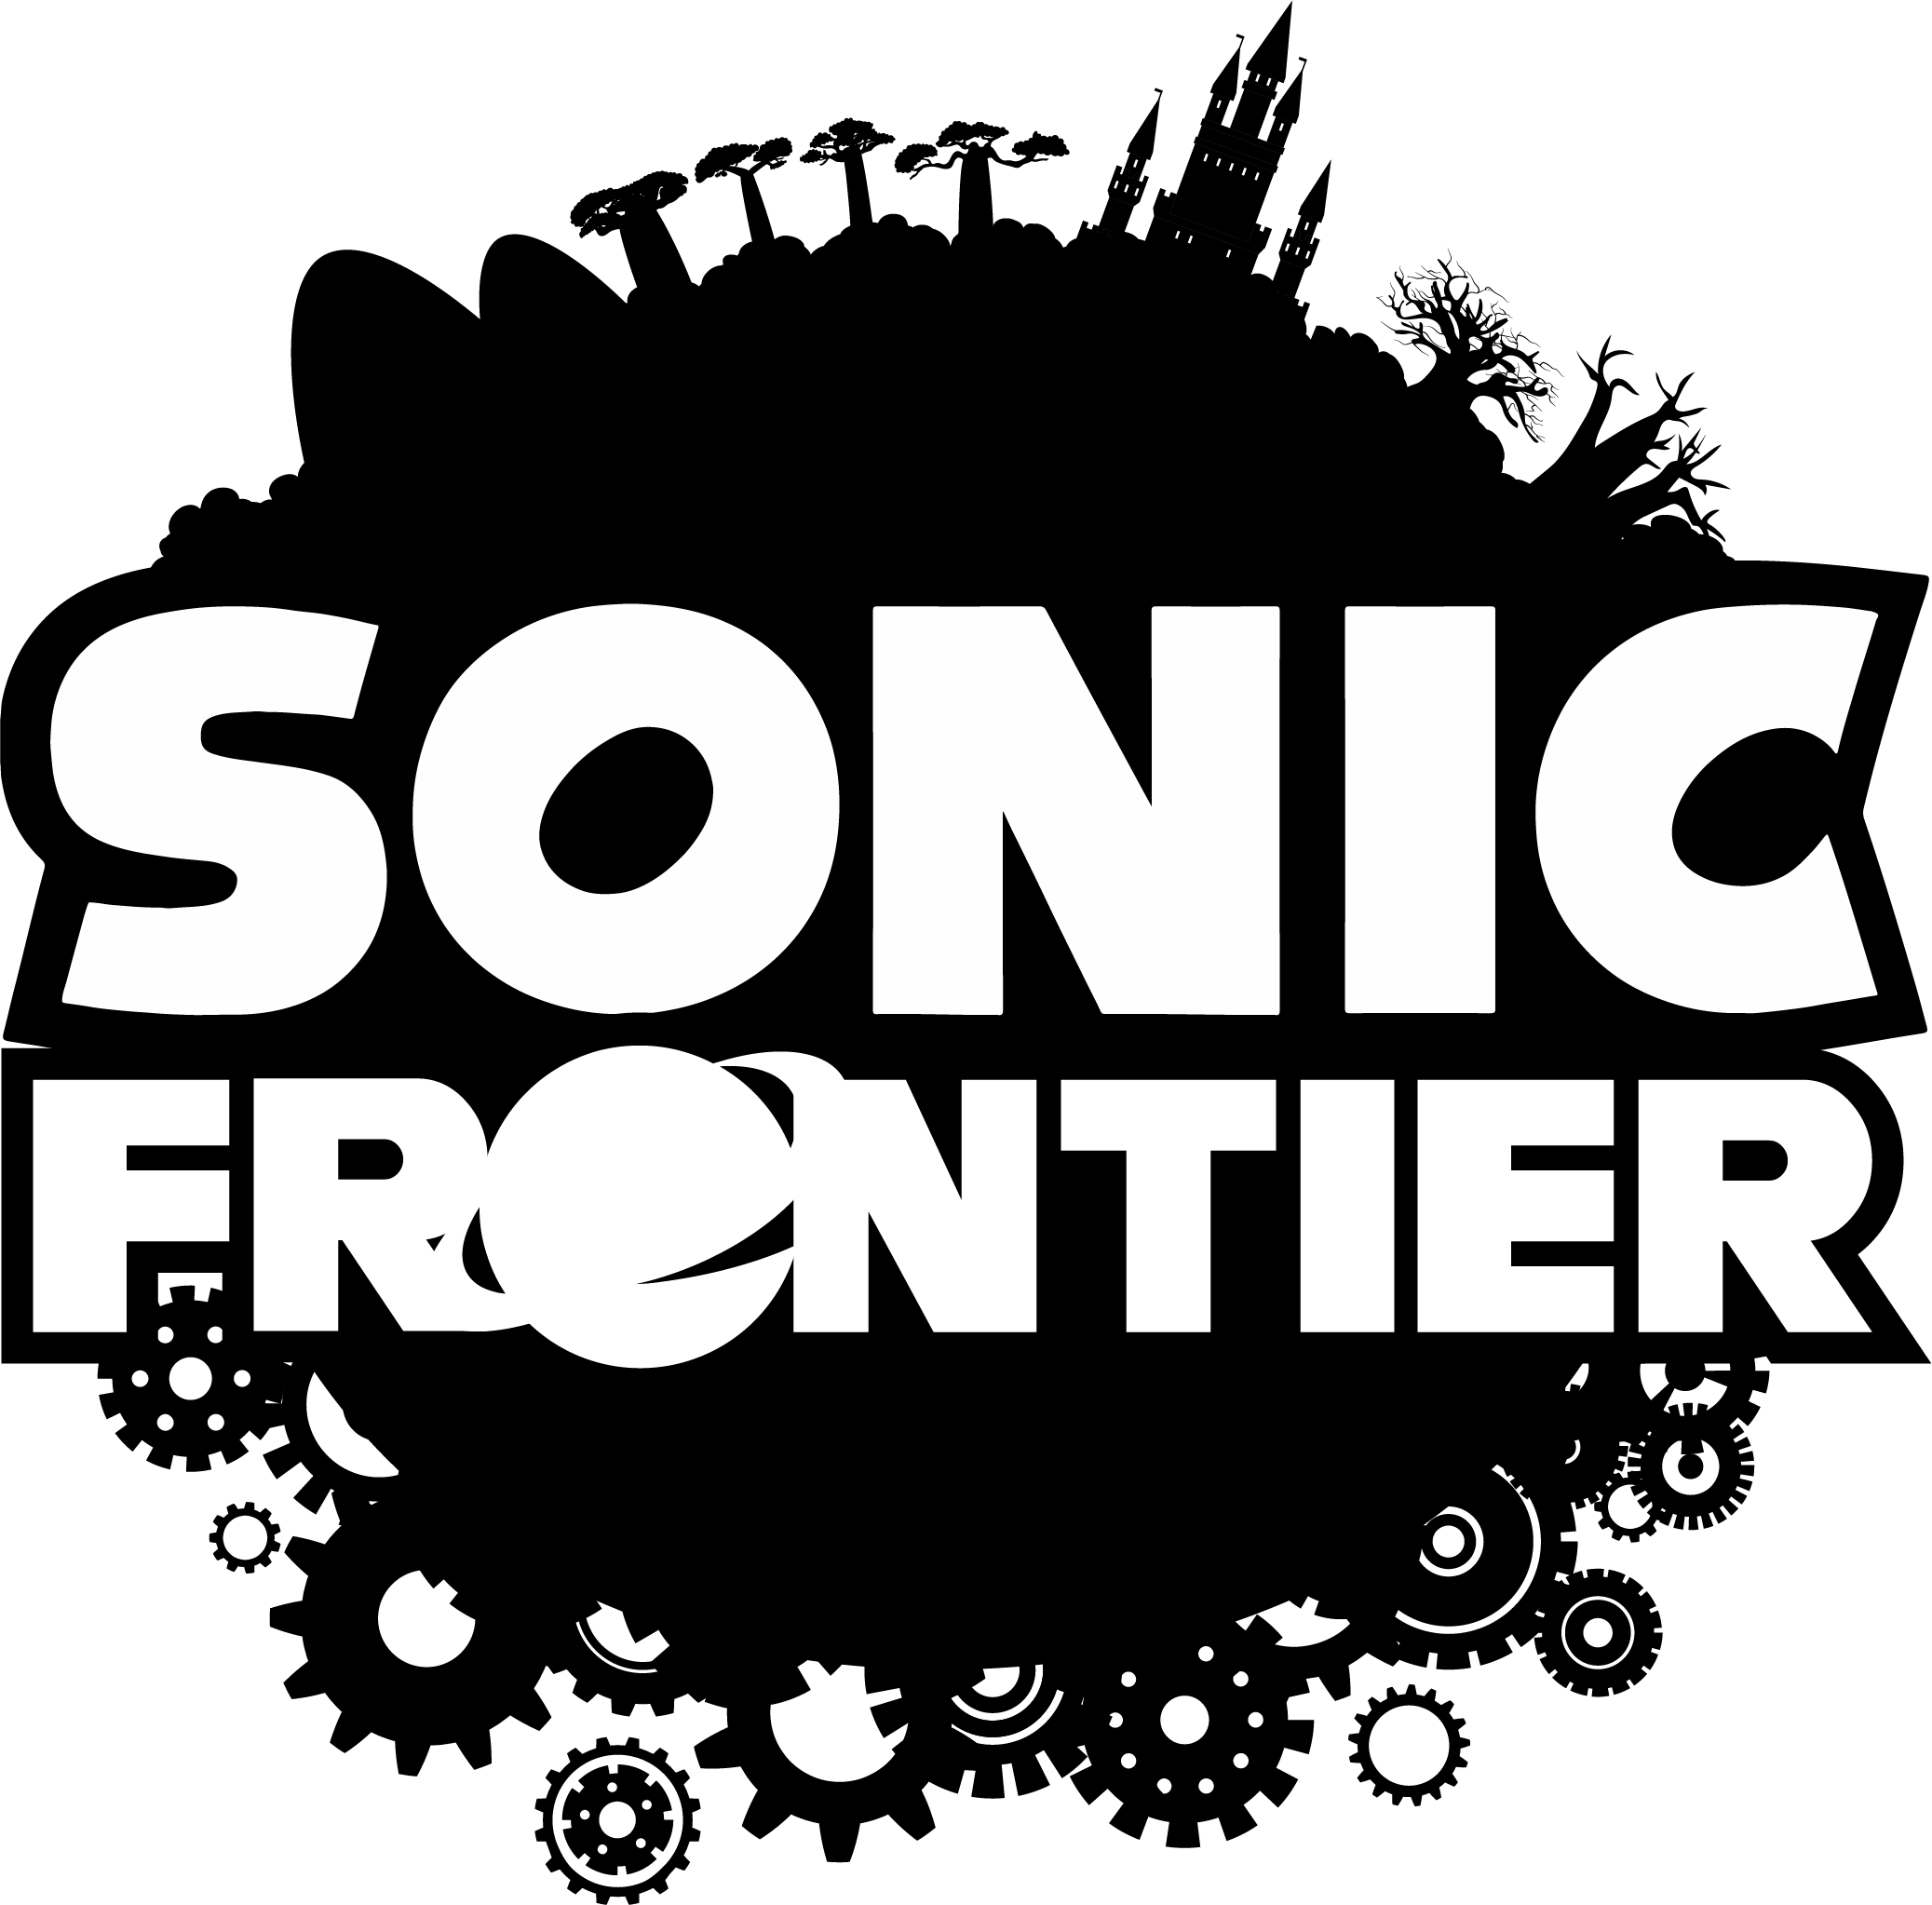 sonic frontiers game trailer